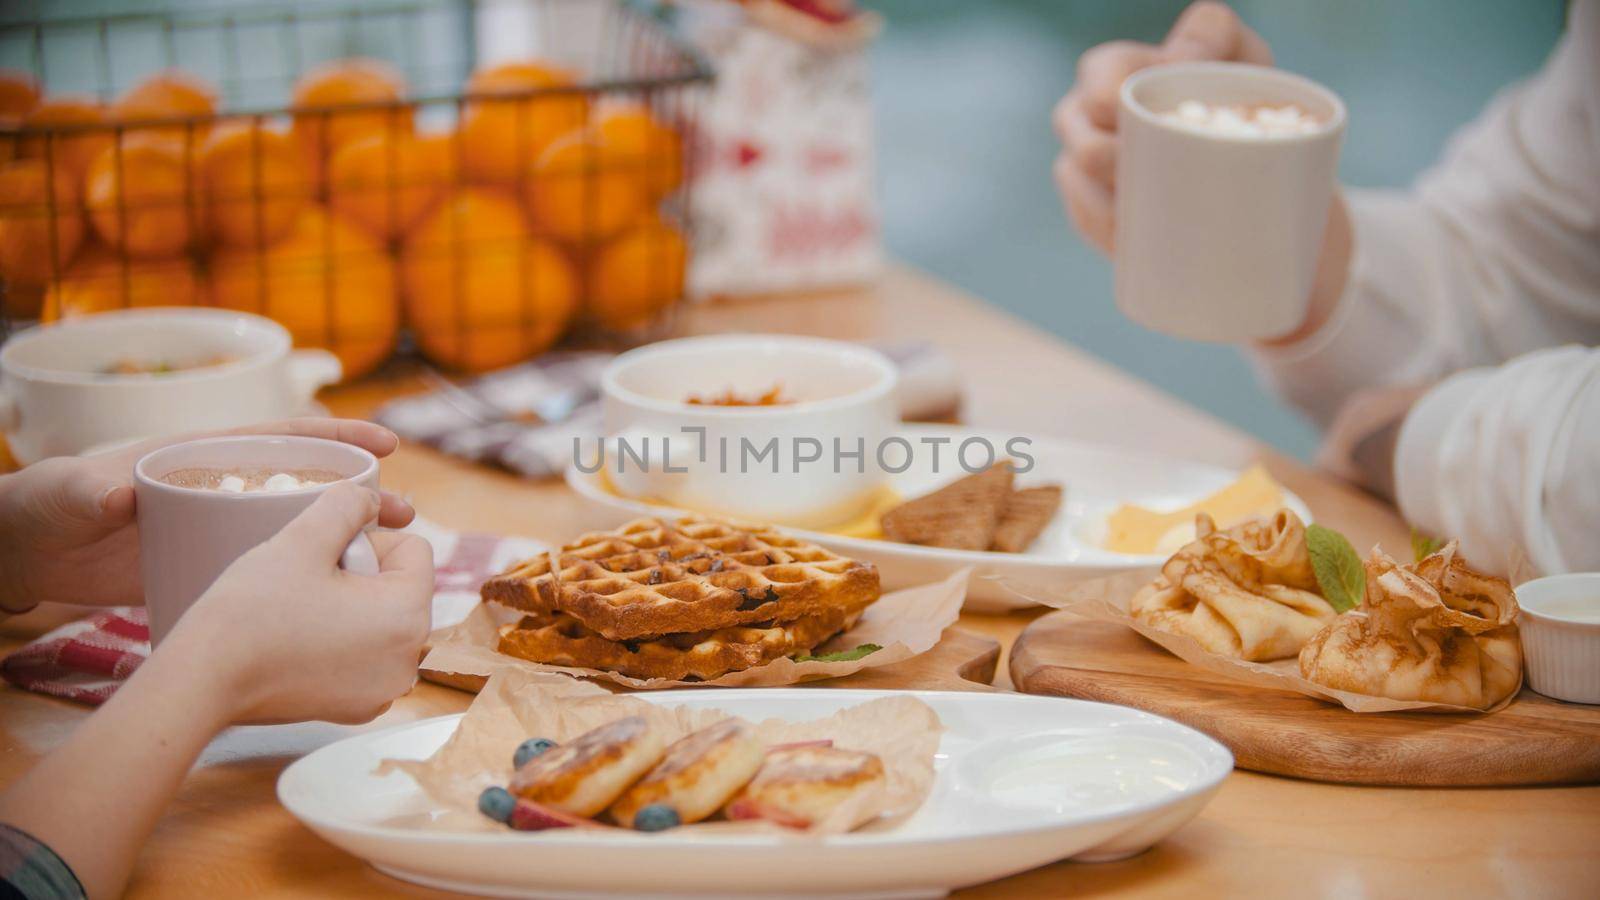 A couple in restaurant having a breakfast of waffles and pancakes. Mid shot